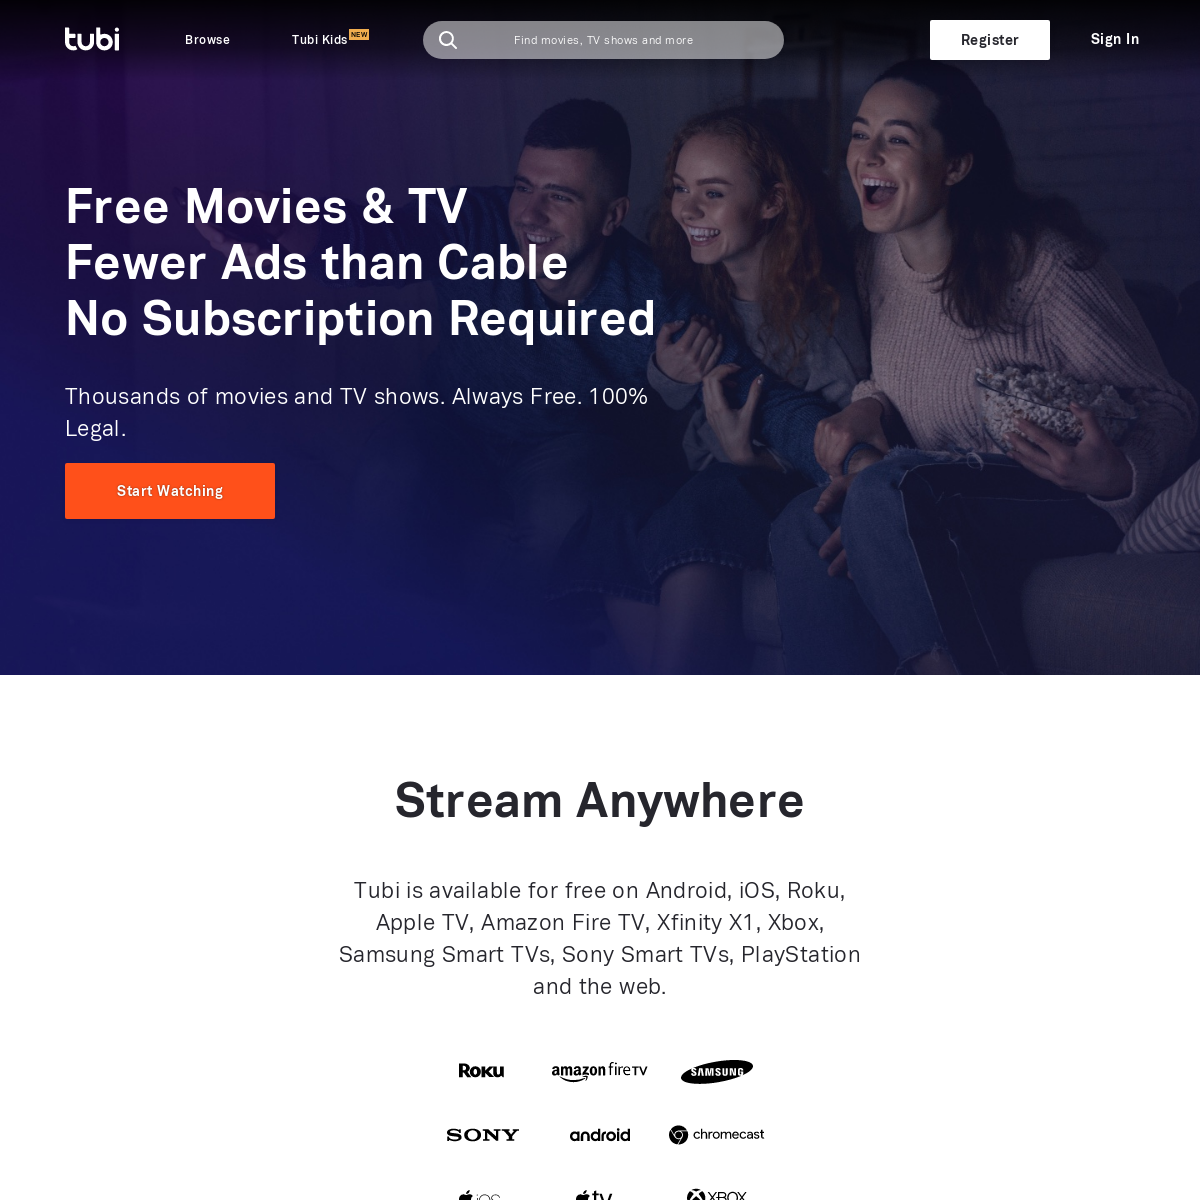 A complete backup of tubitv.com